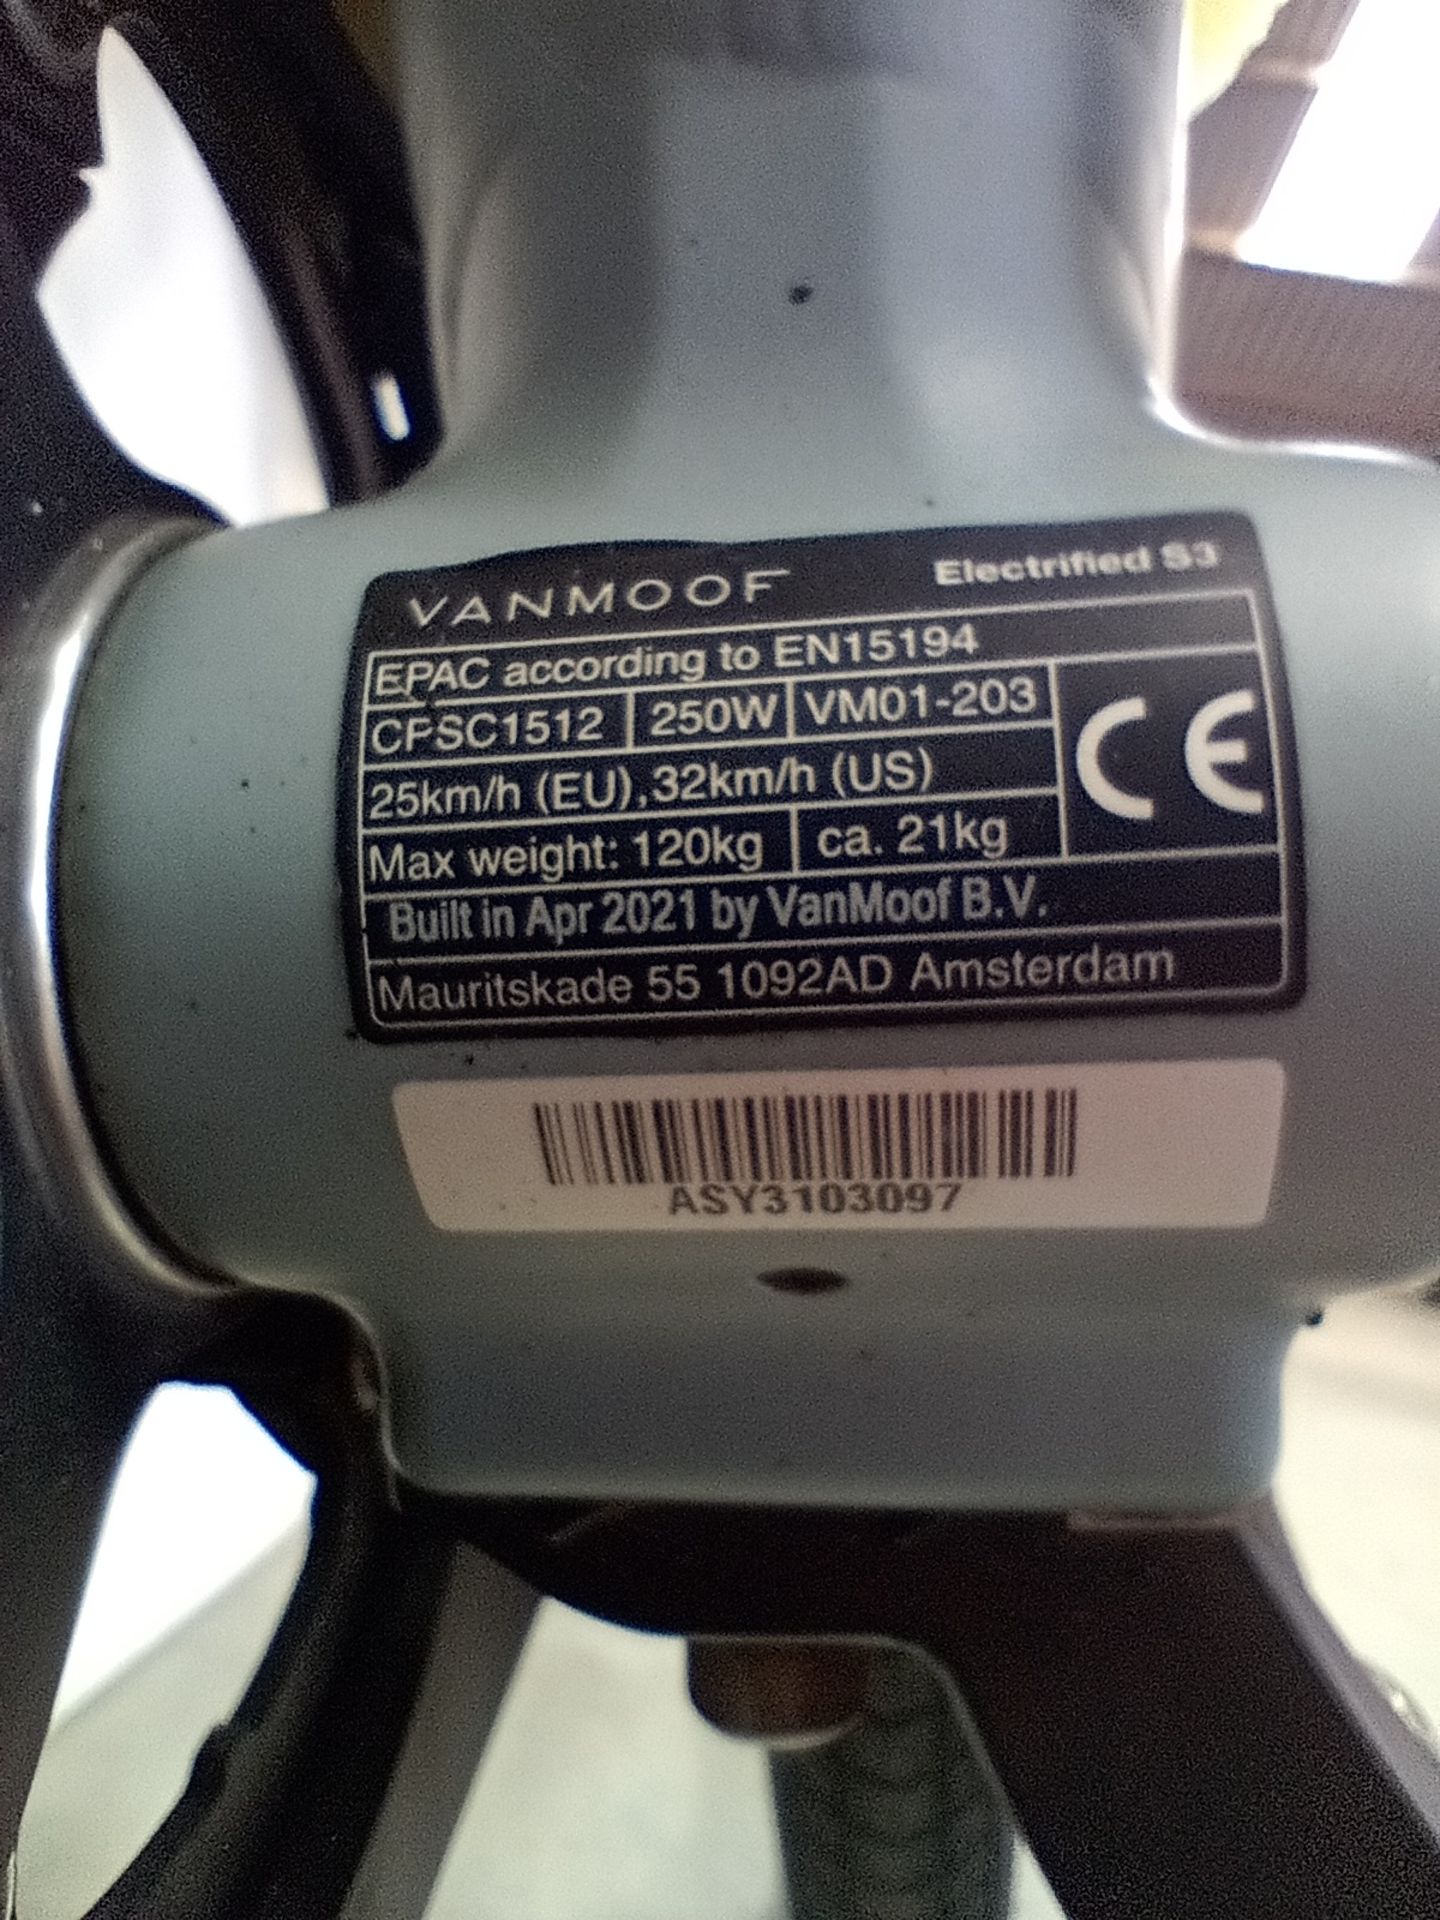 VanMoof S3 Electric Bike, Ex-Demo, Frame Number ASY3103097 (NOT ROADWORTHY - FOR SPARES ONLY) (No - Image 4 of 4